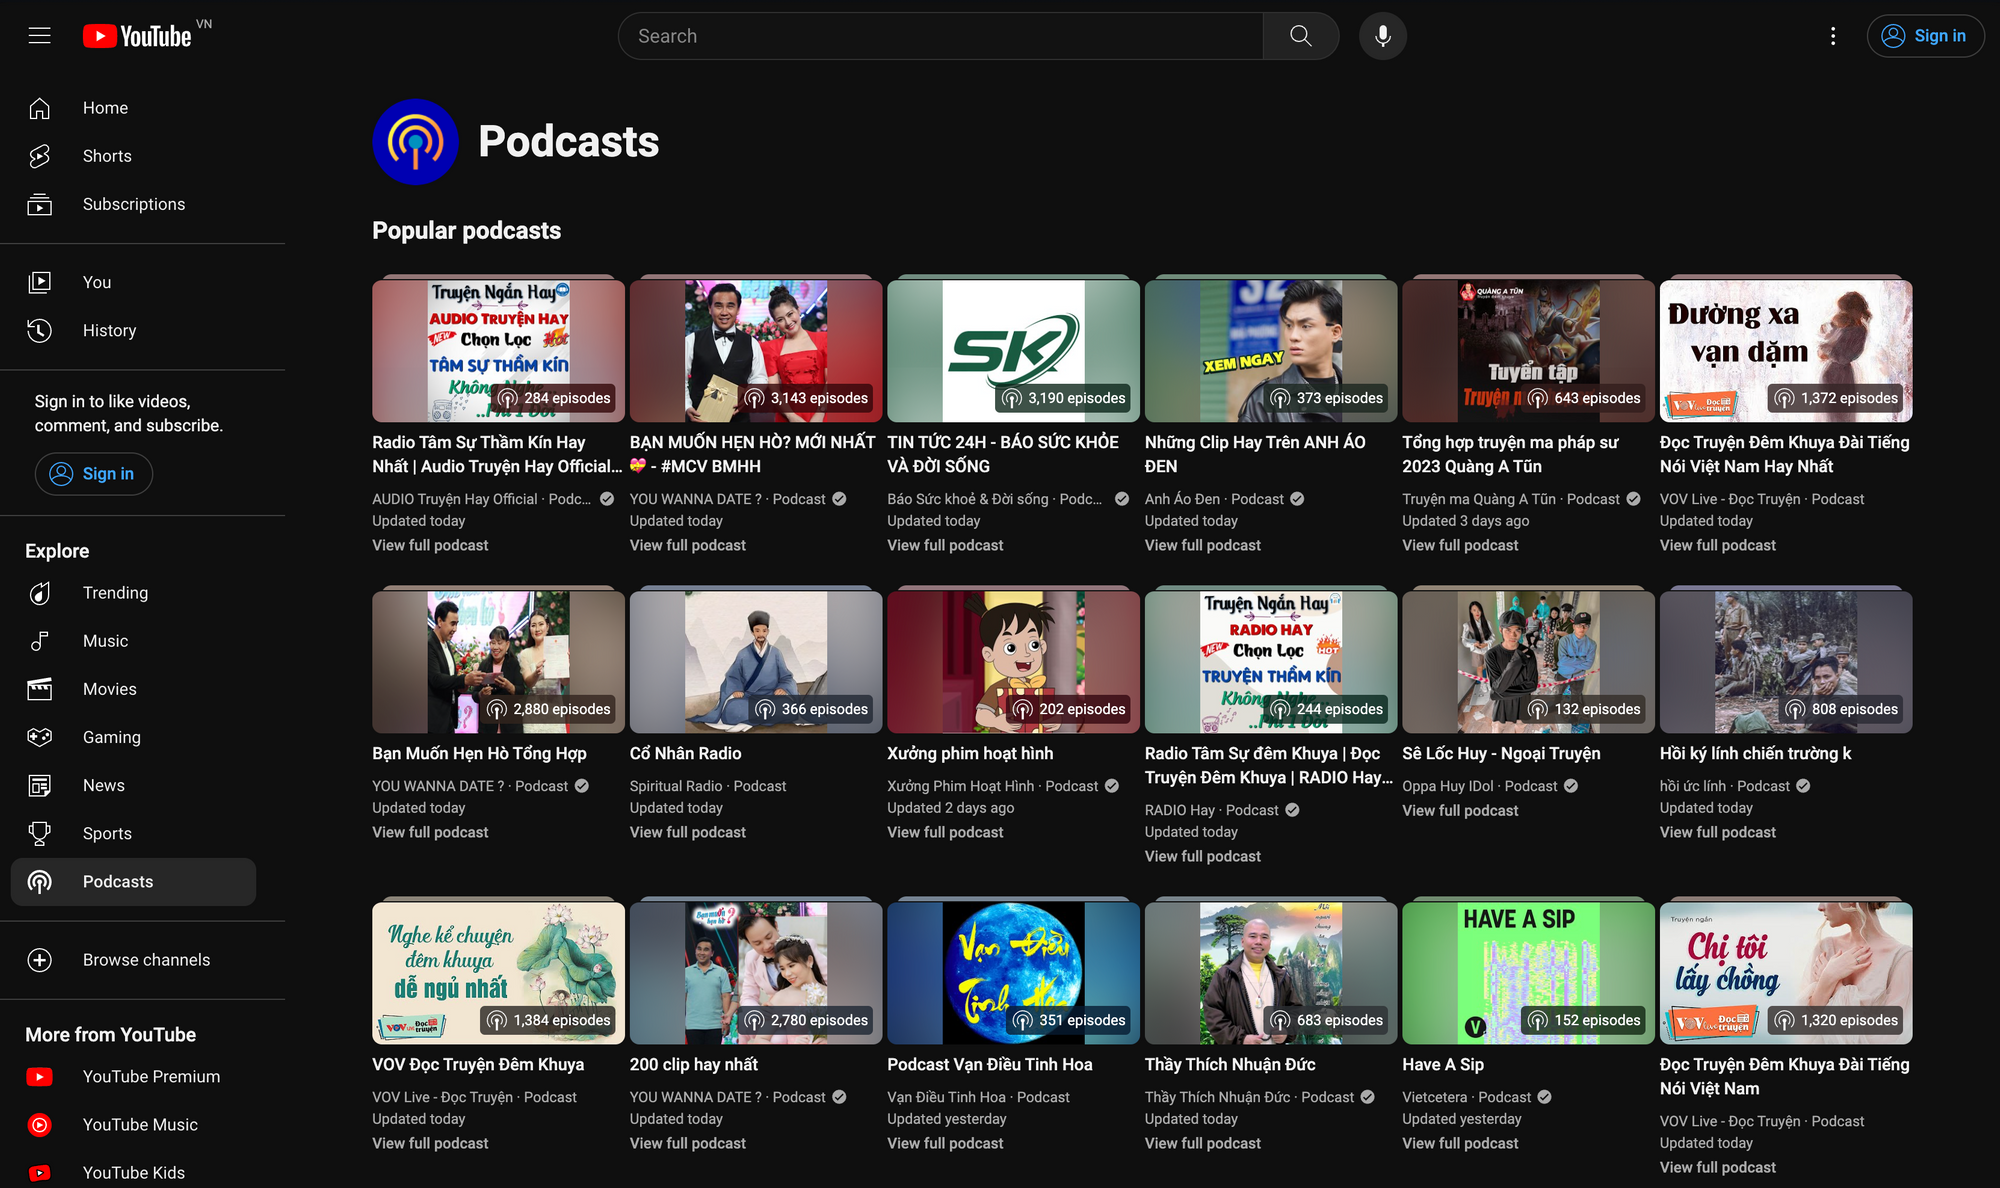 YouTube podcast page for Vietnam